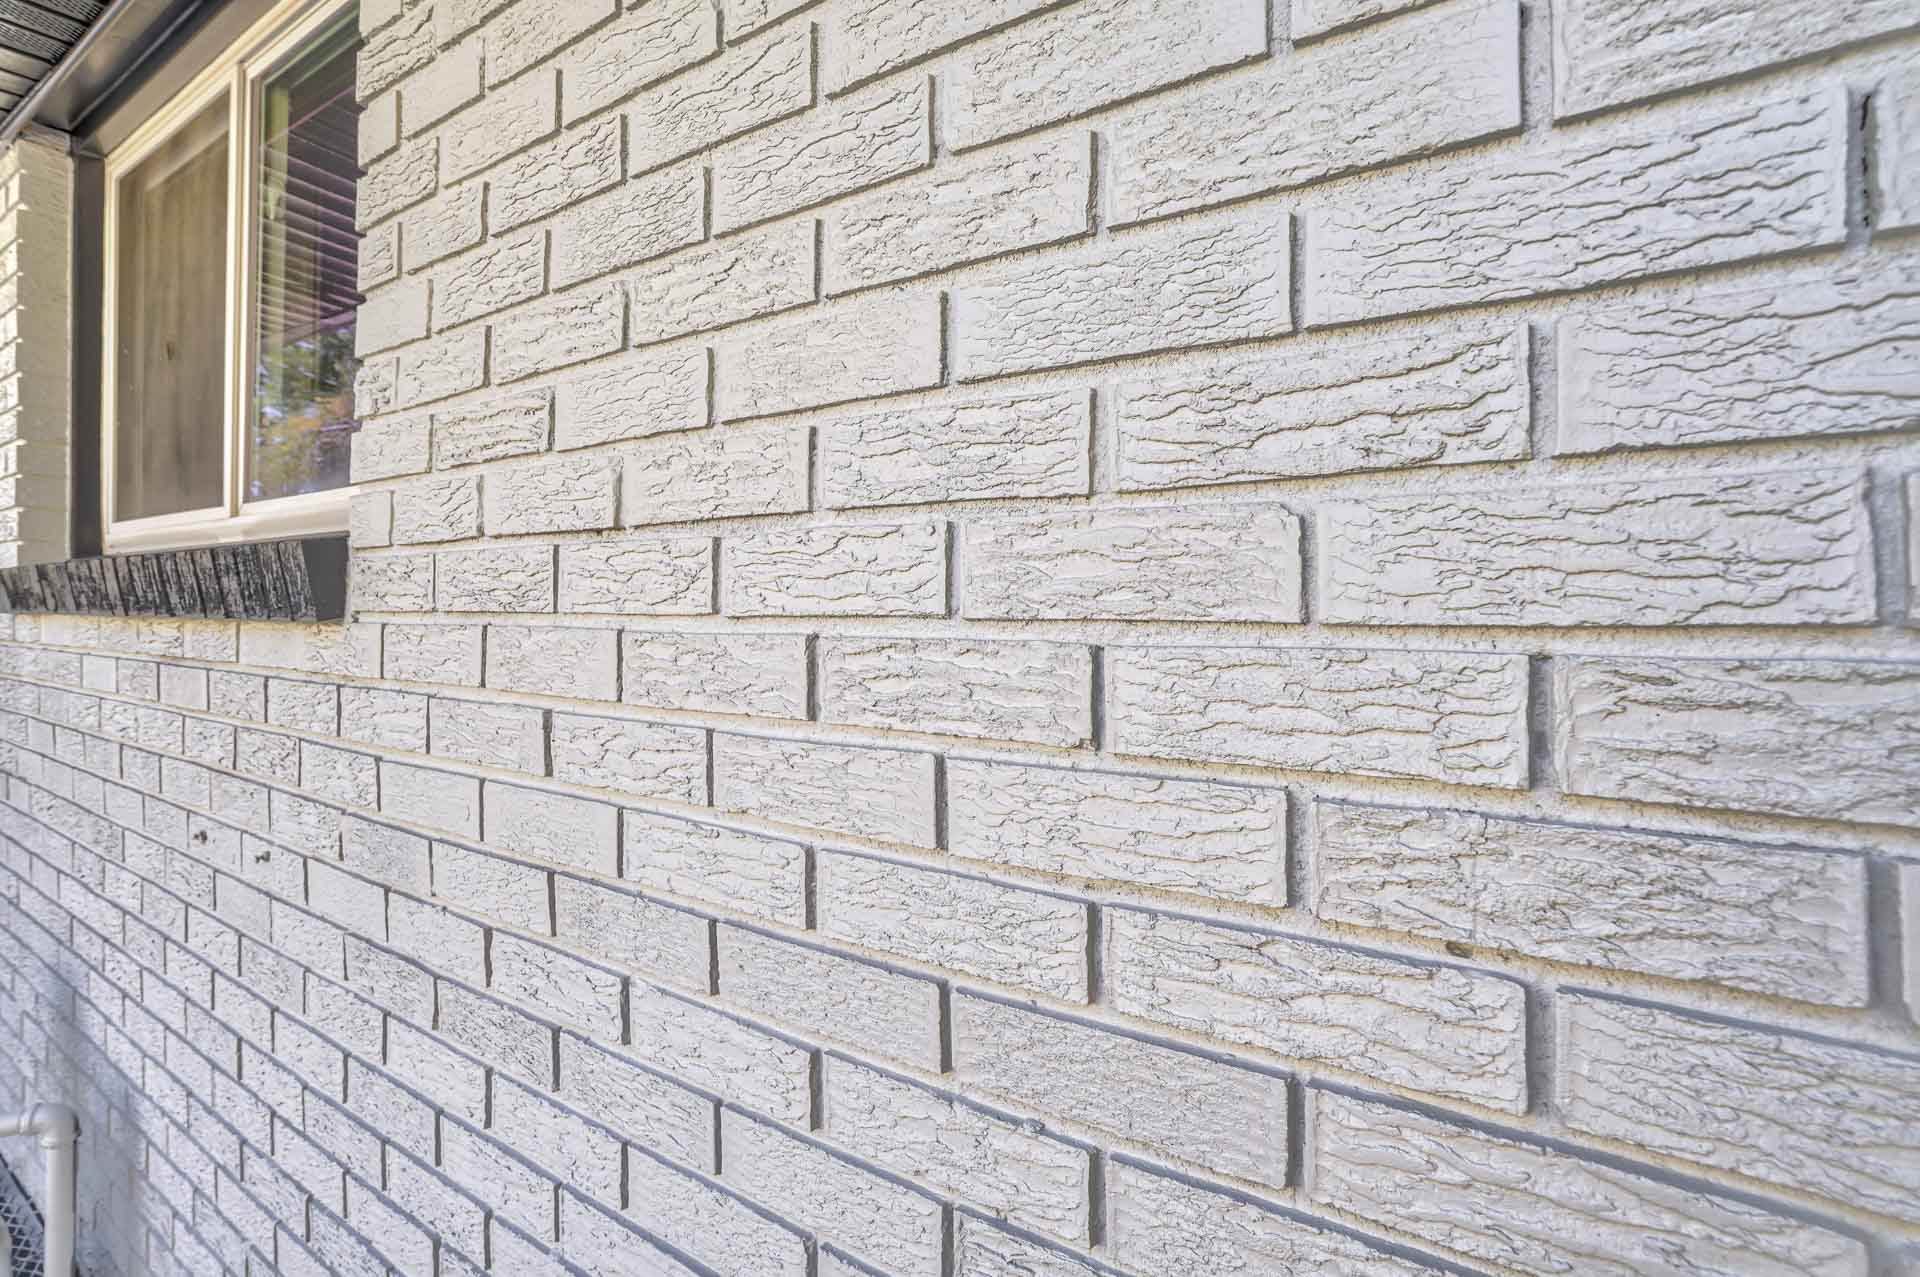 How To Paint Brick To Look Like Stone